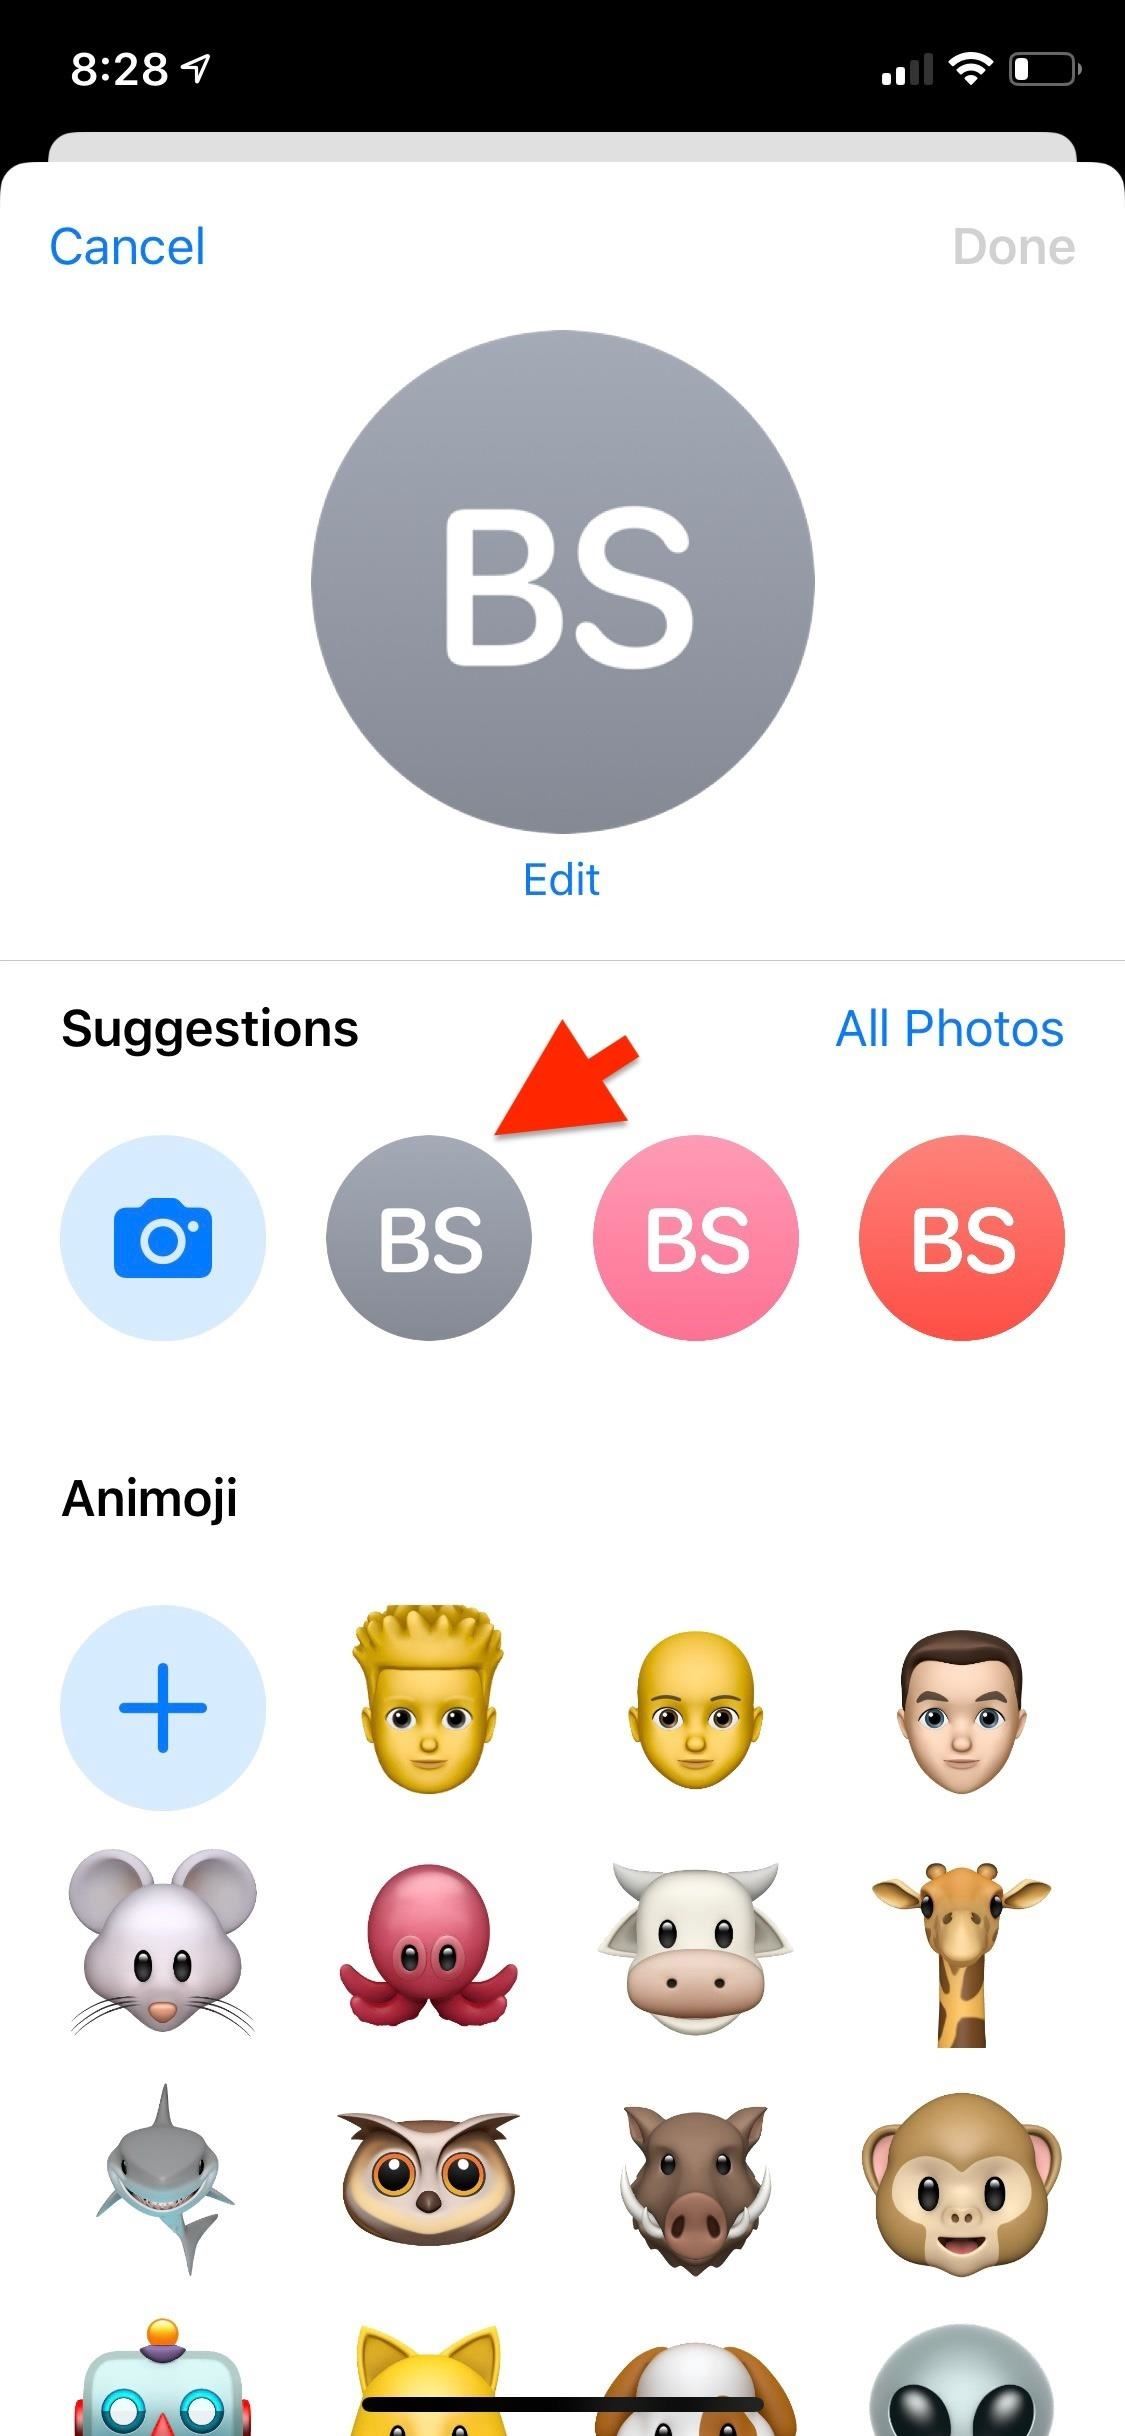 How to Create Memoji, Animoji & Monogram Images for Anyone in Your iPhone's Contacts List